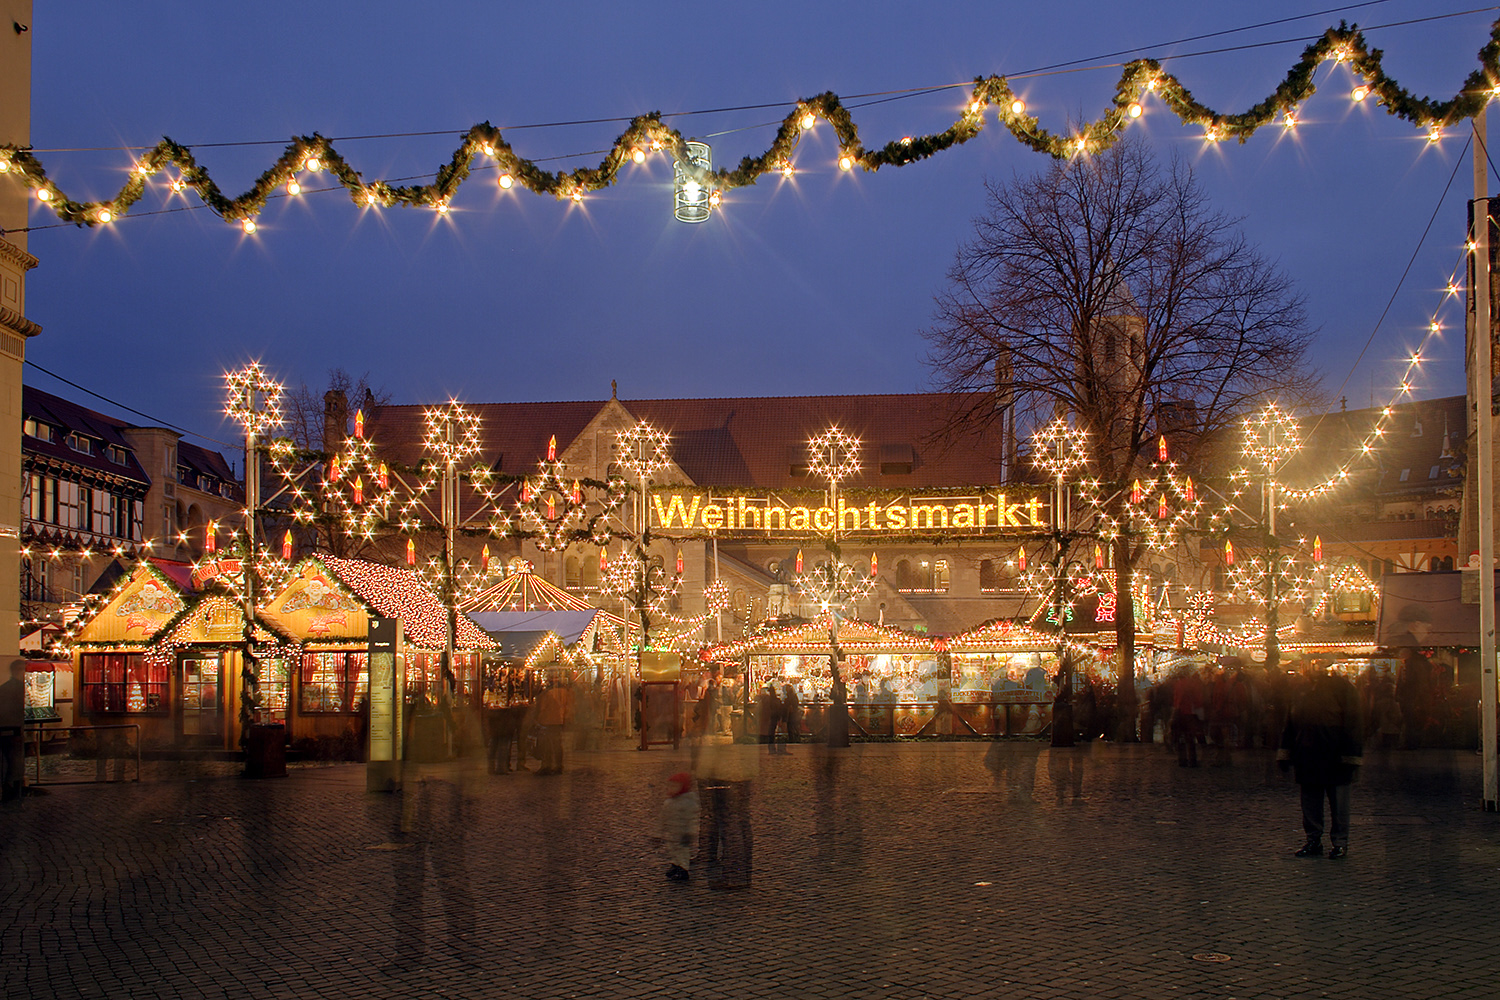 Braunschweig Christmas Market © Igge - licence [CC BY-SA 3.0] from Wikimedia Commons